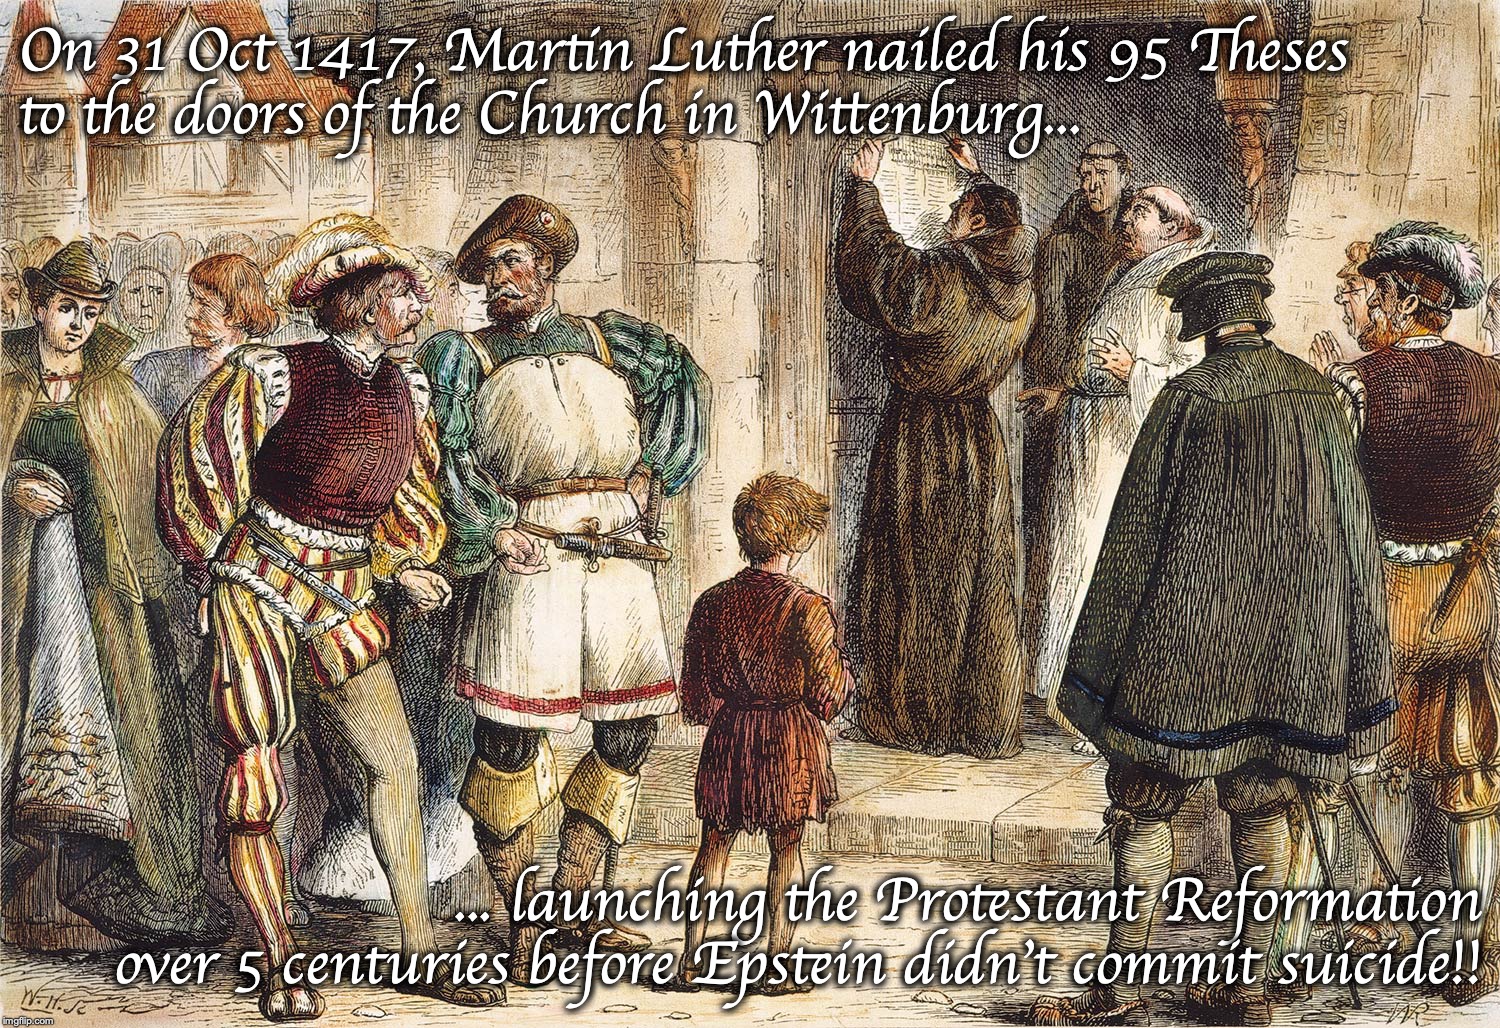 the 95 theses nailed